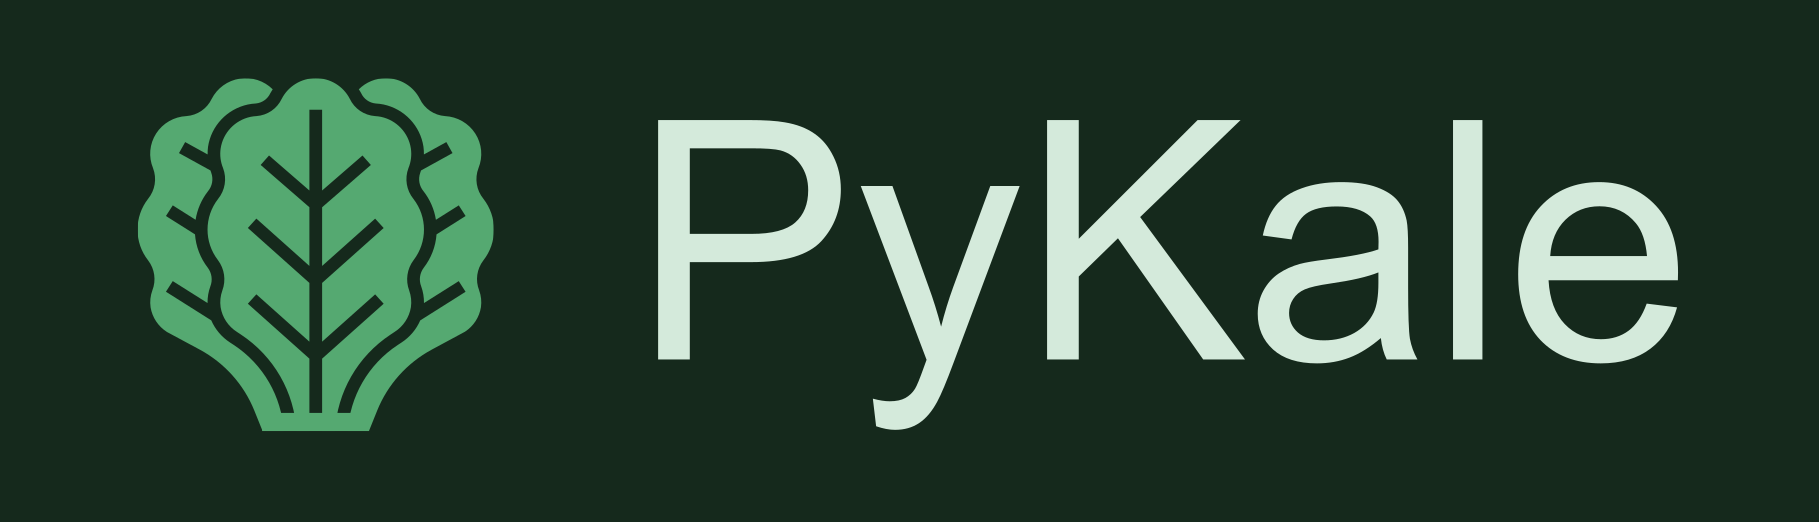 project-pykale